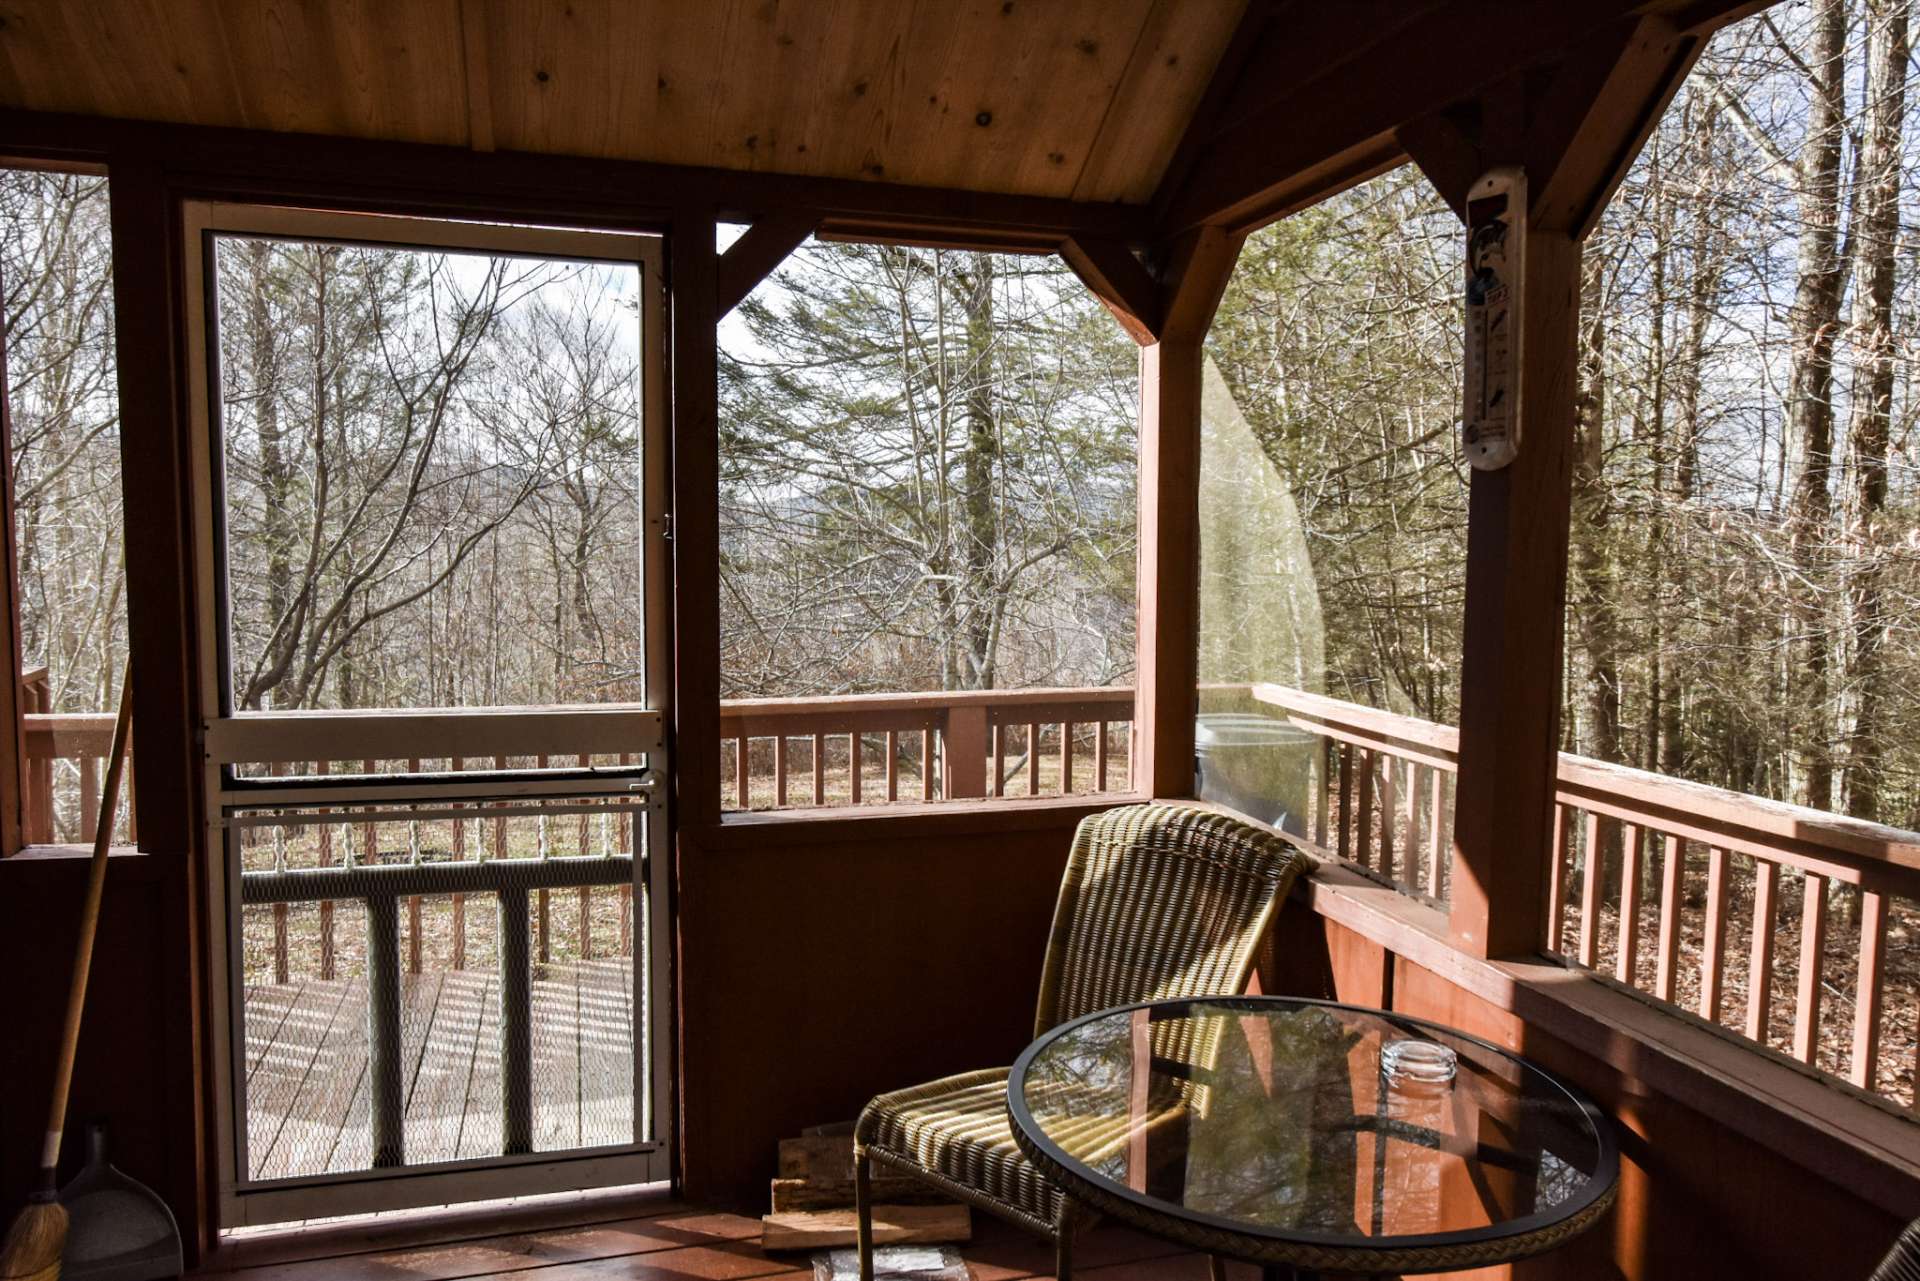 Each cabin also has a screened porch and spacious open deck.